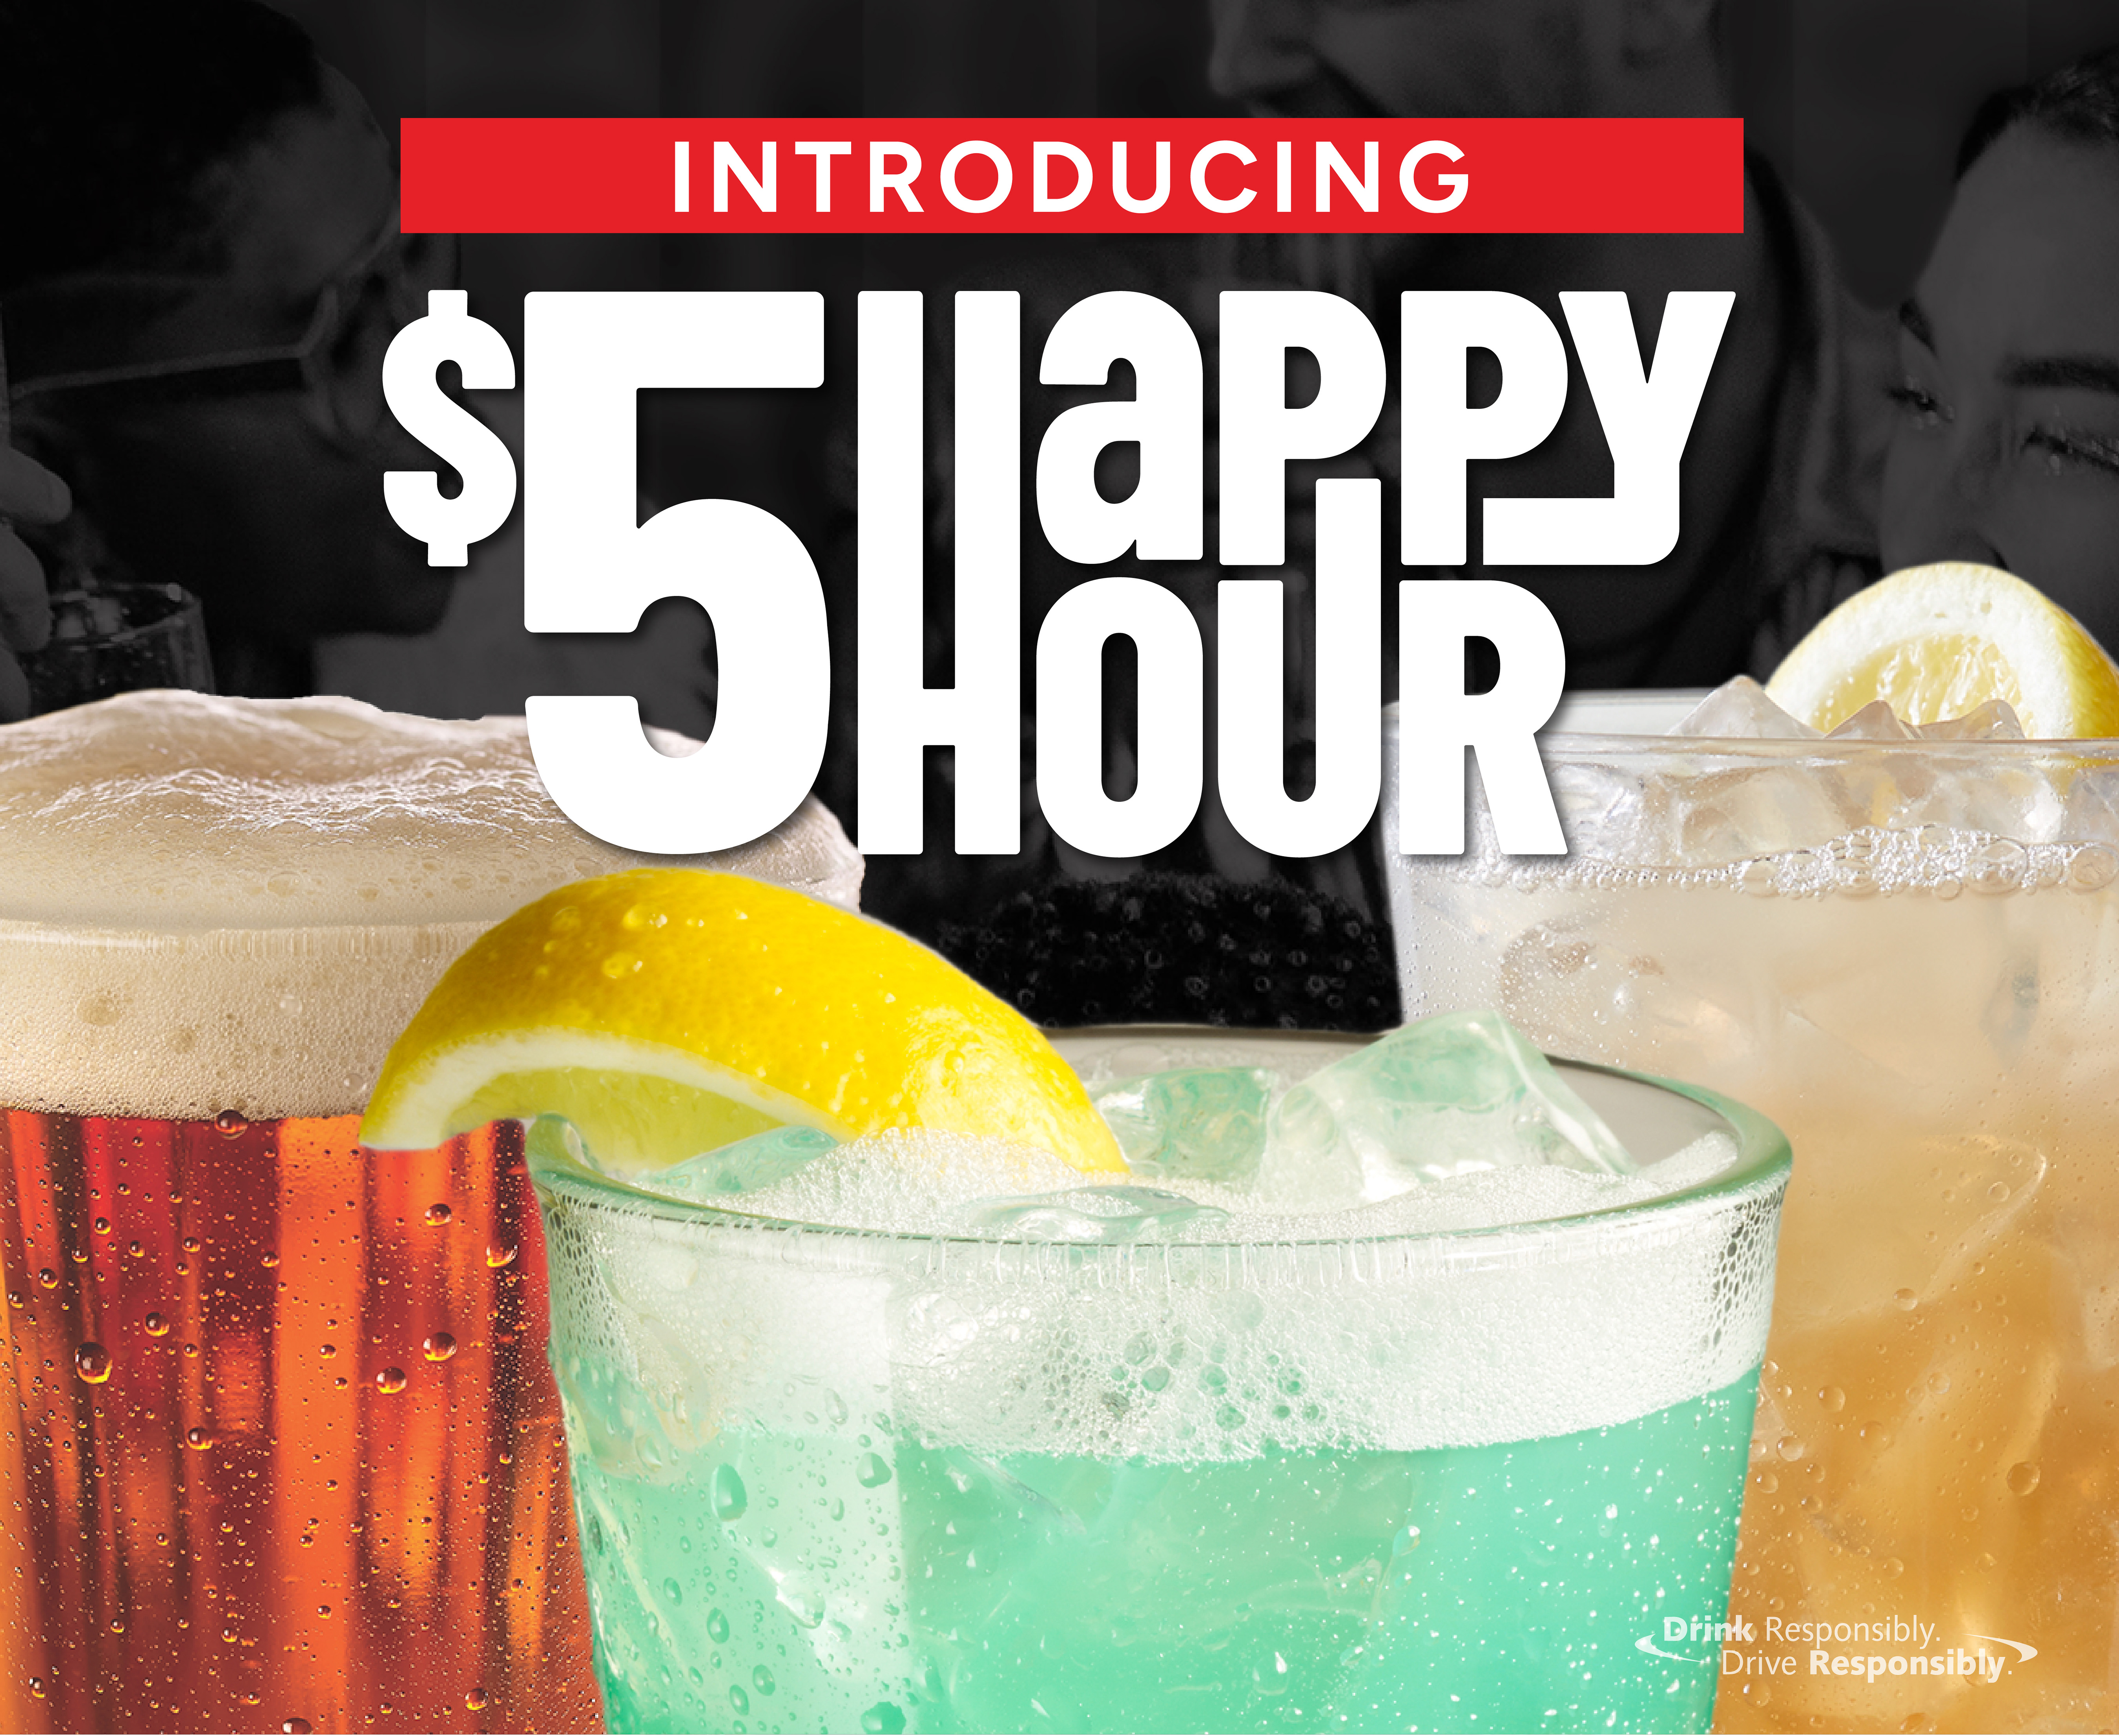 Introducing $5 HAPPY HOUR. Our all NEW Happy Hour is here. Premium cocktail selections for just $5. Whether it's post-work relaxation or grabbing a drink with friends, we've got you.
 
Dine-in only. At participating locations only. Hours and times may vary by location. Drink Responsibly. Don't Drink and Drive.